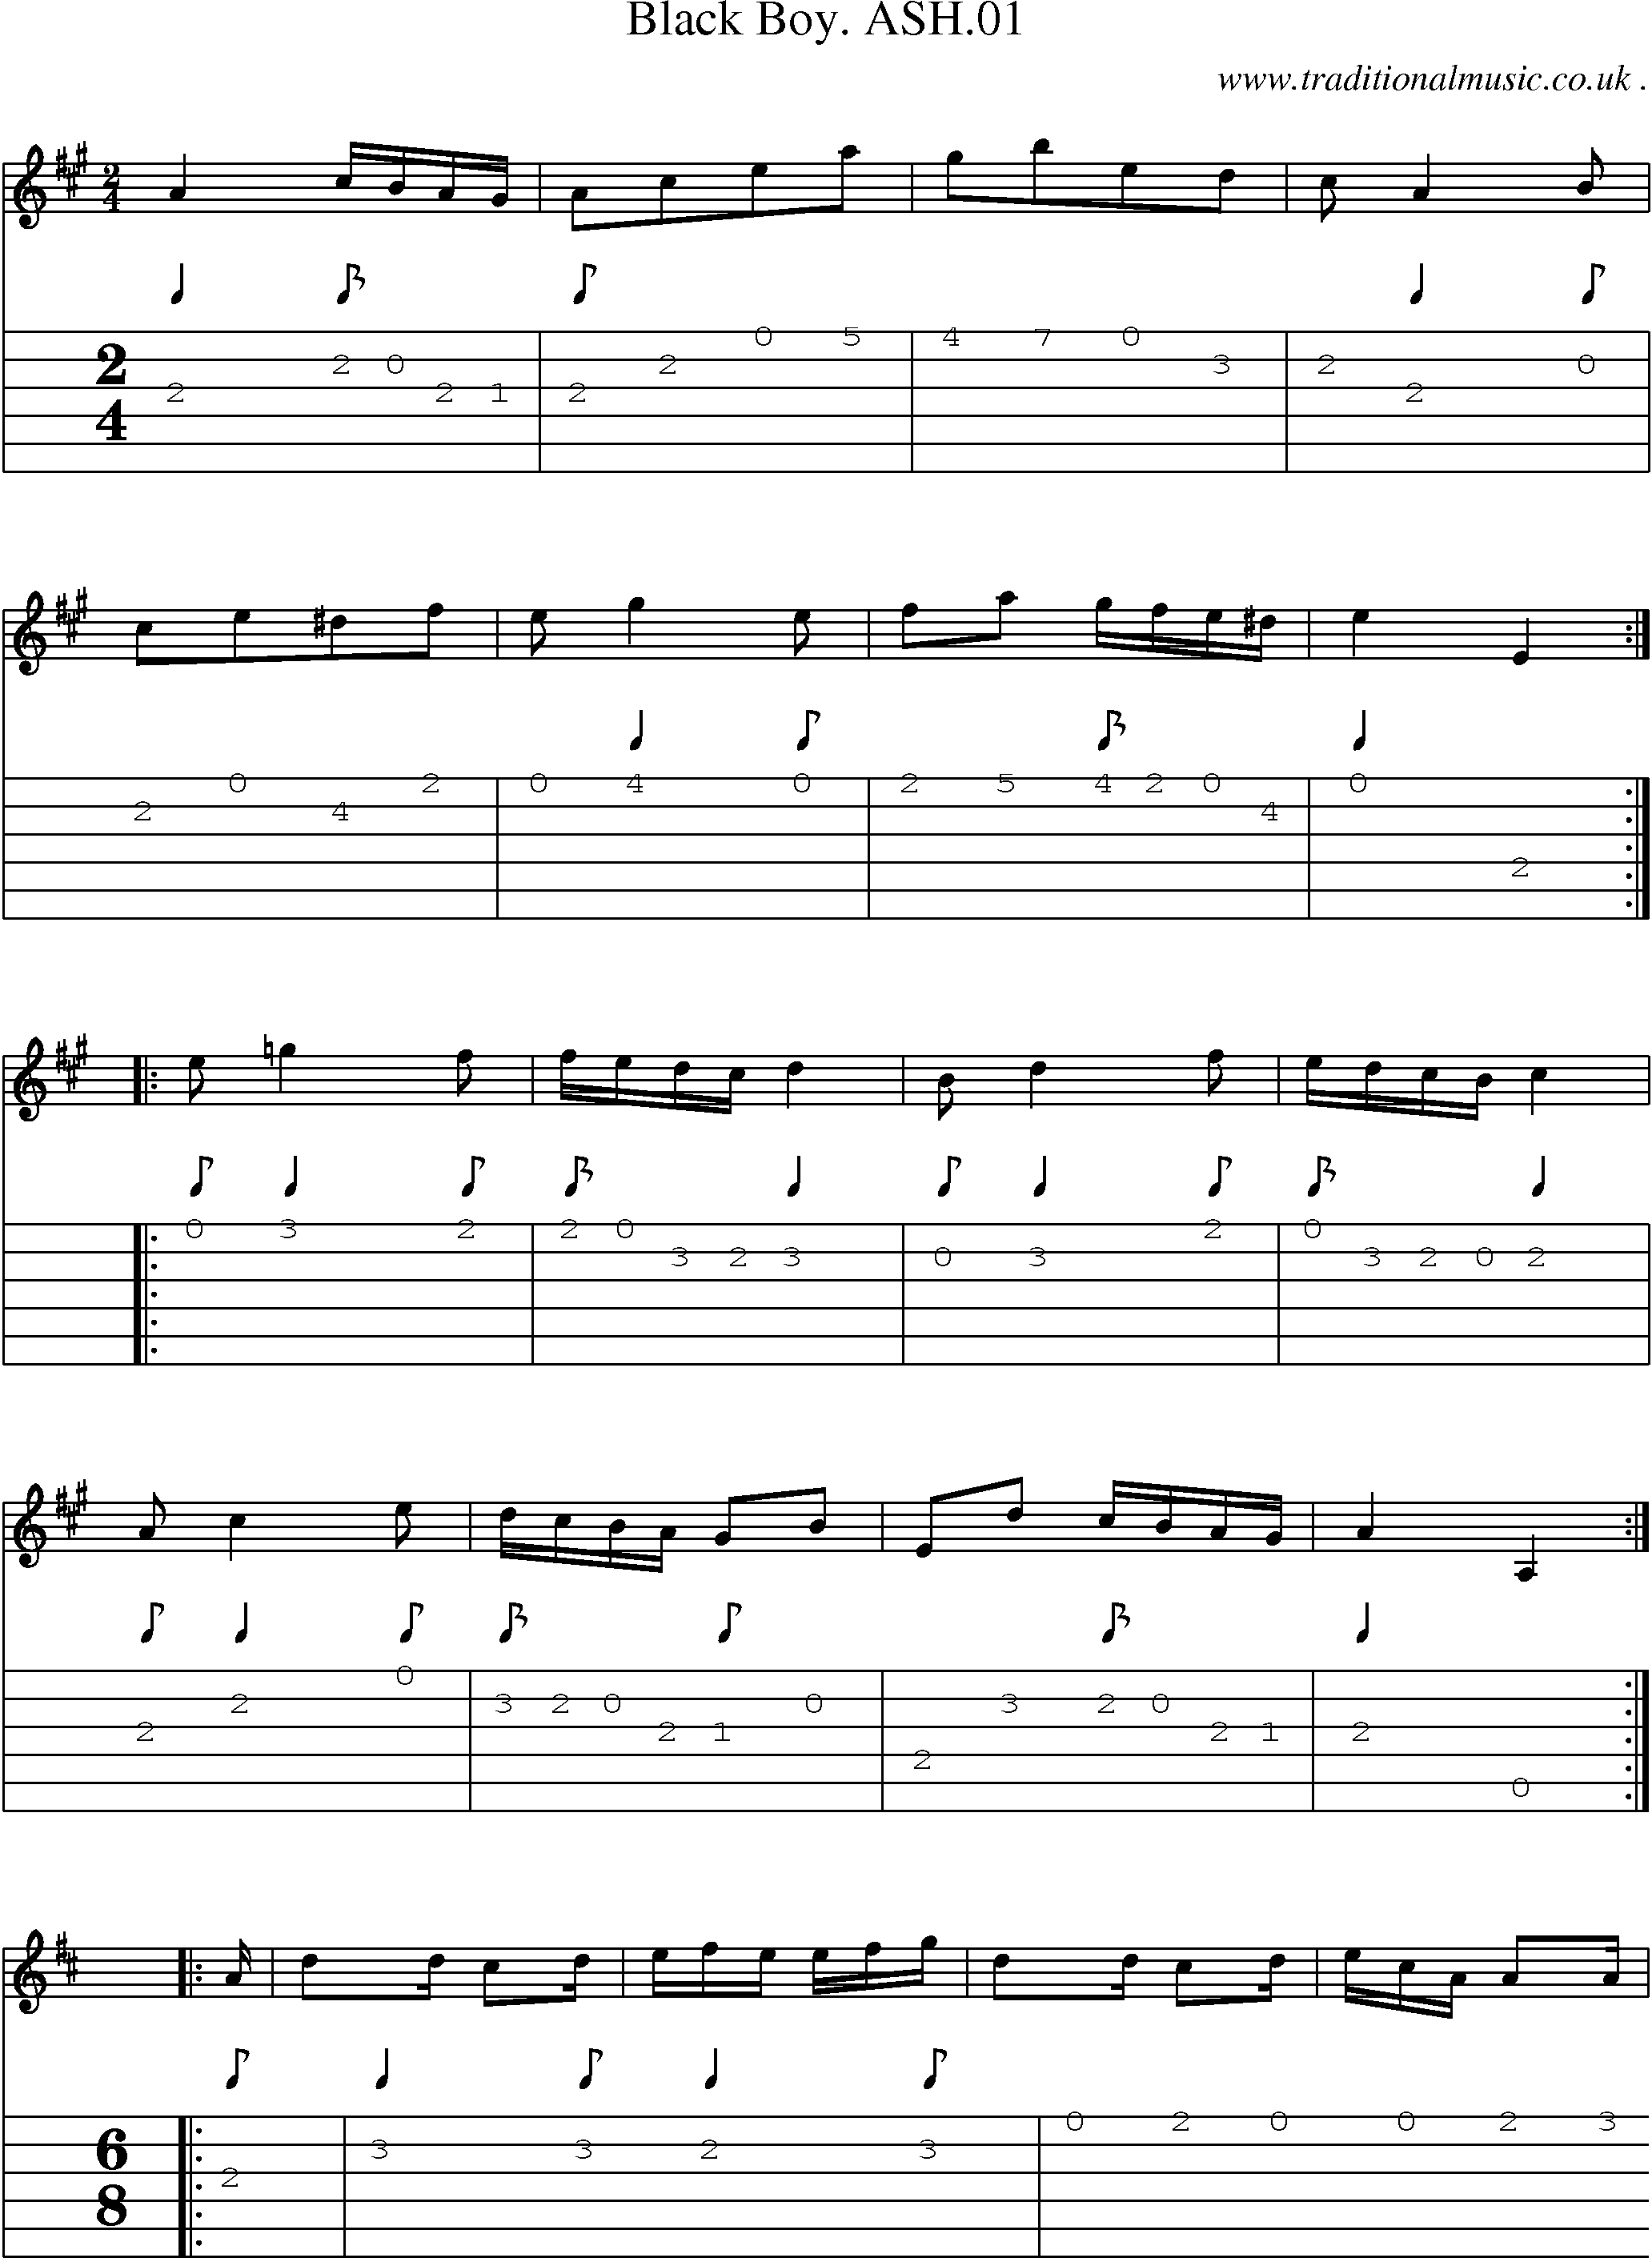 Sheet-Music and Guitar Tabs for Black Boy Ash01